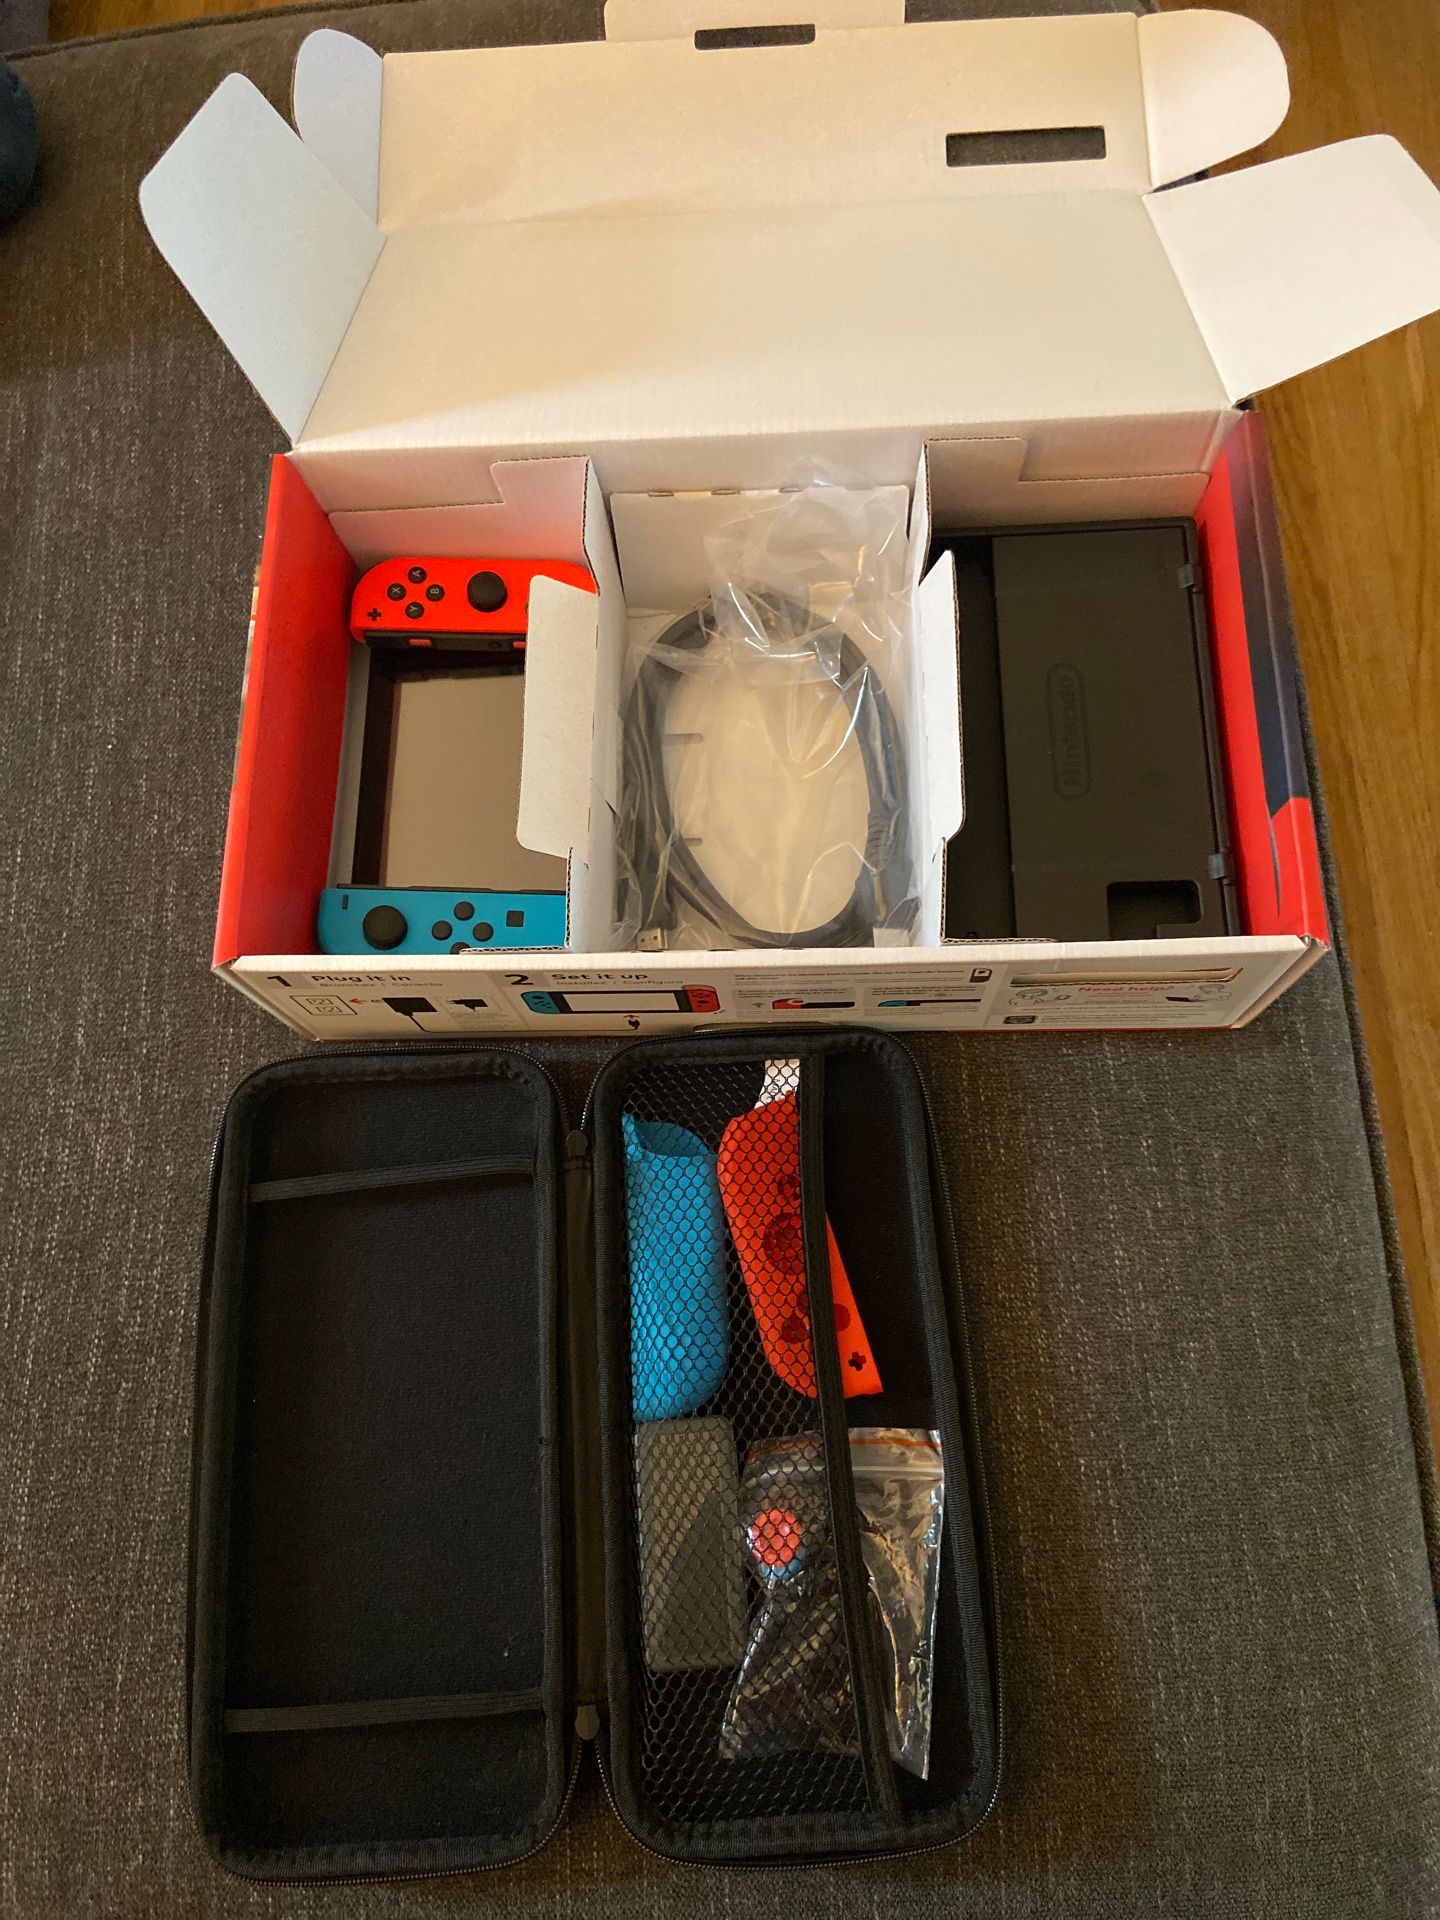 Nintendo switch newest version barely used